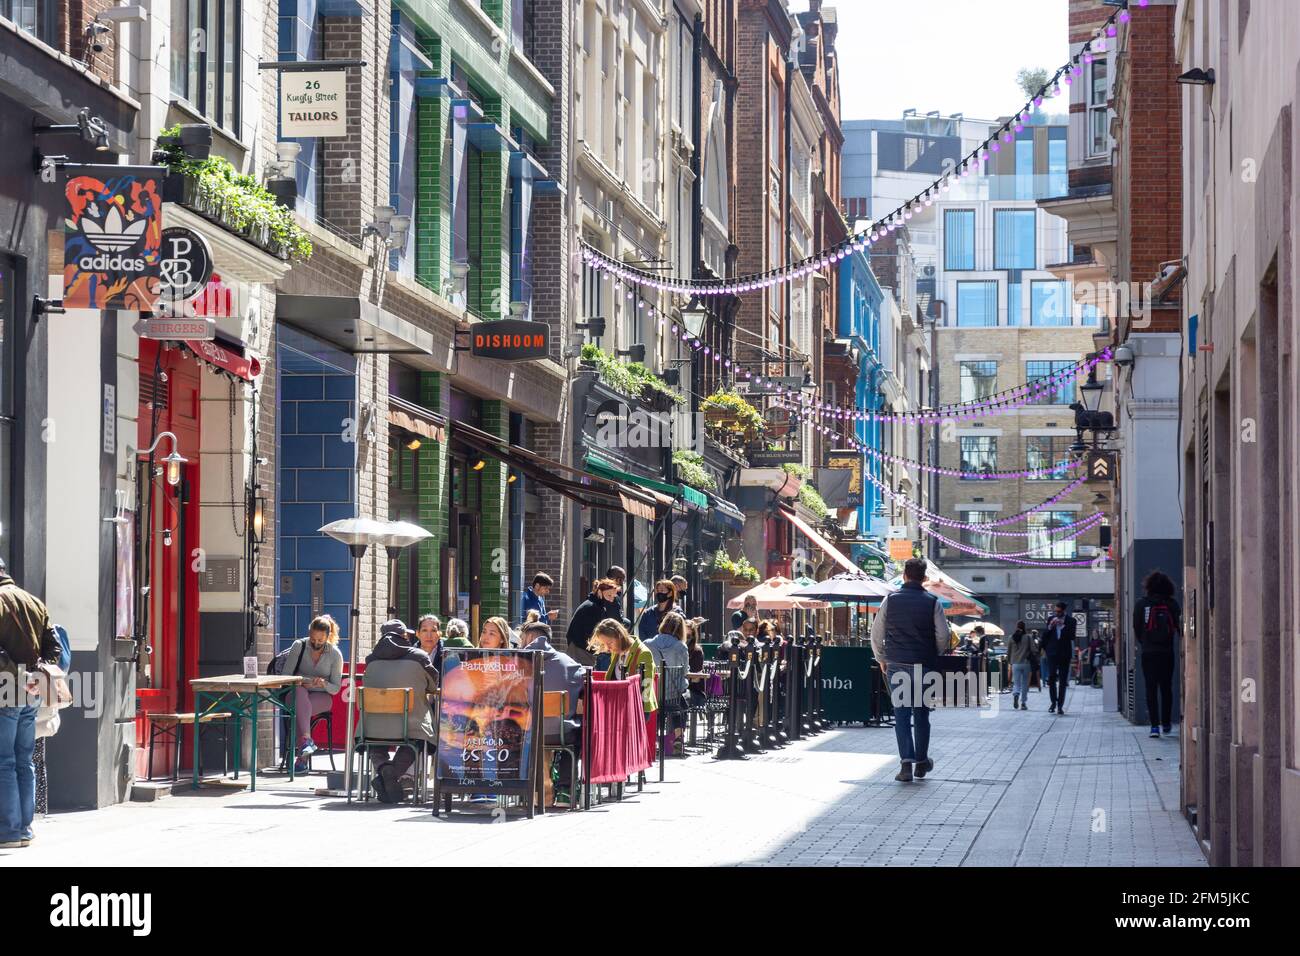 Outdoor restaurants, Kingly Street, West End, Soho, City of Westminster, Greater London, England, United Kingdom Stock Photo